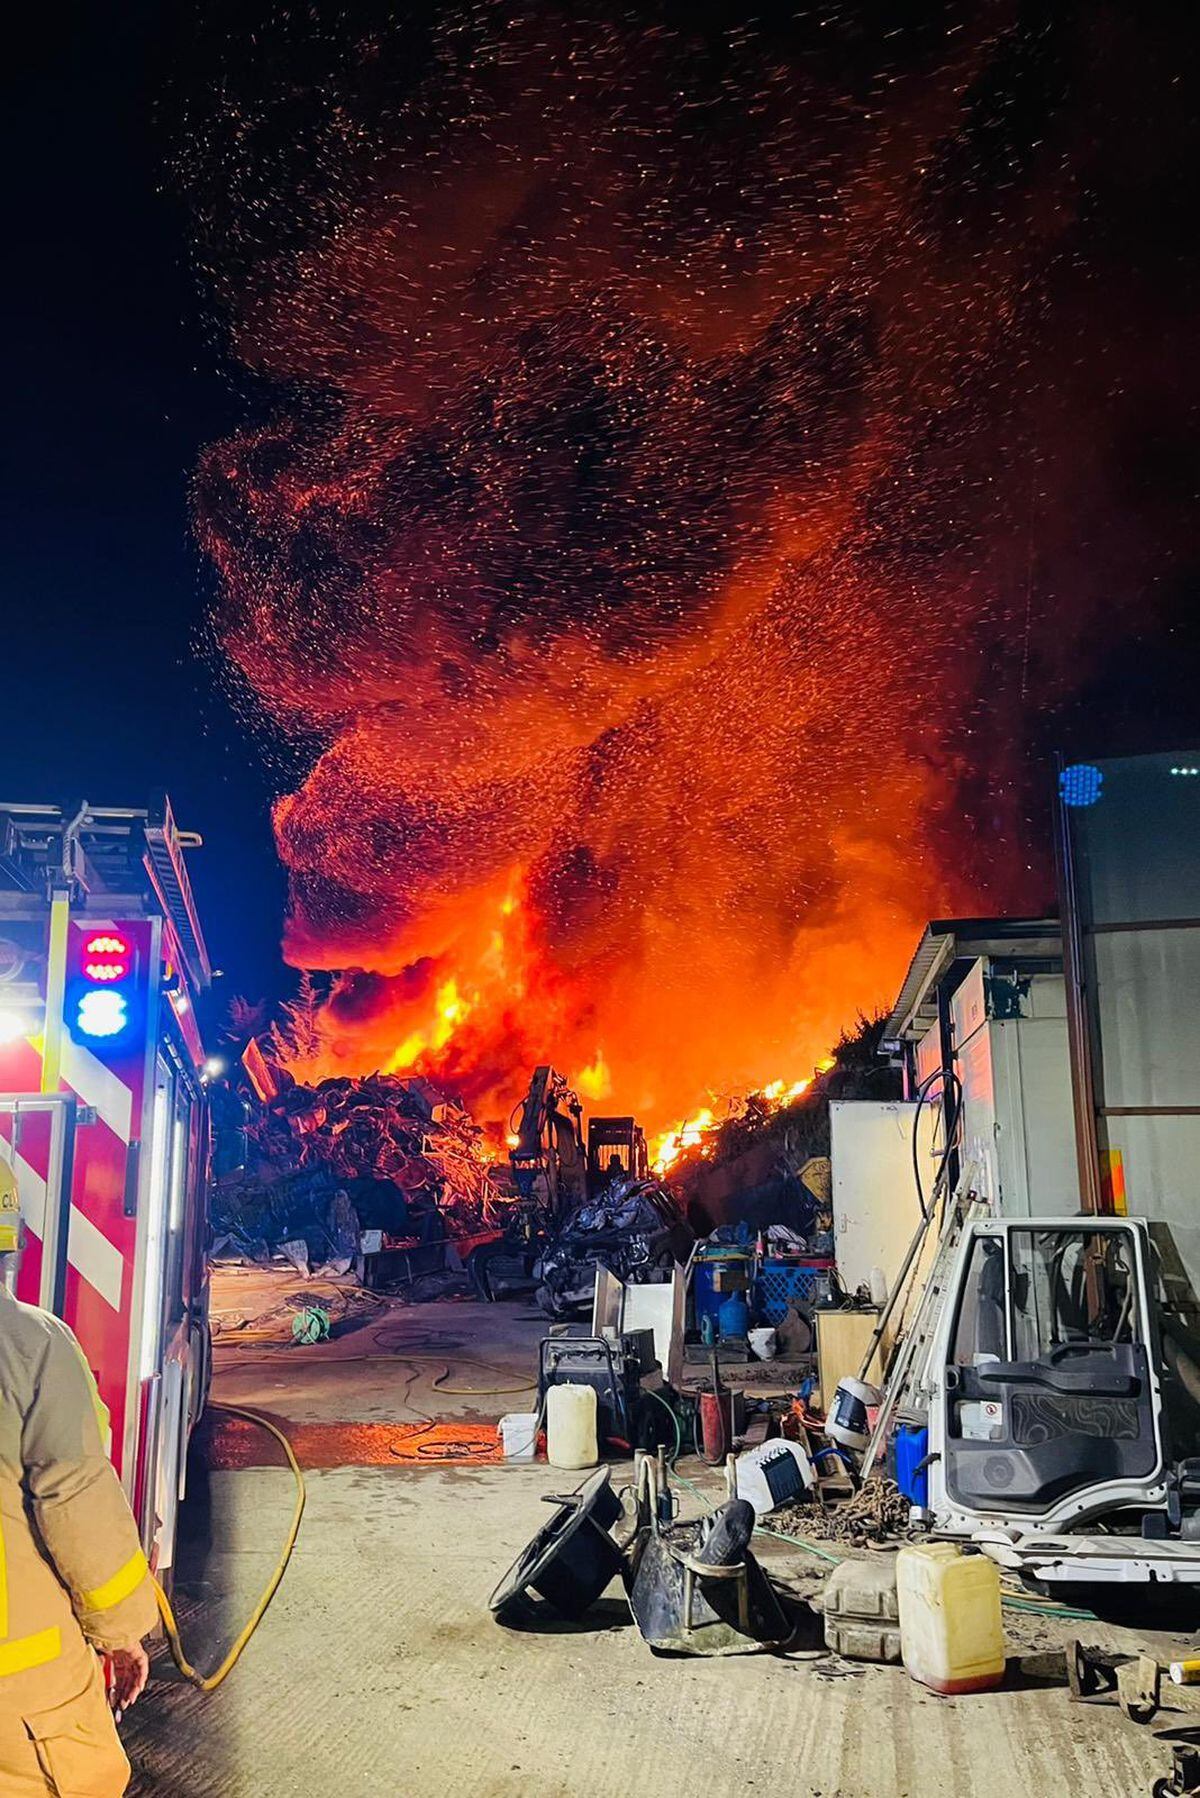 Shropshire Fire and Rescue crews were called to tackle a huge fire at a commercial yard